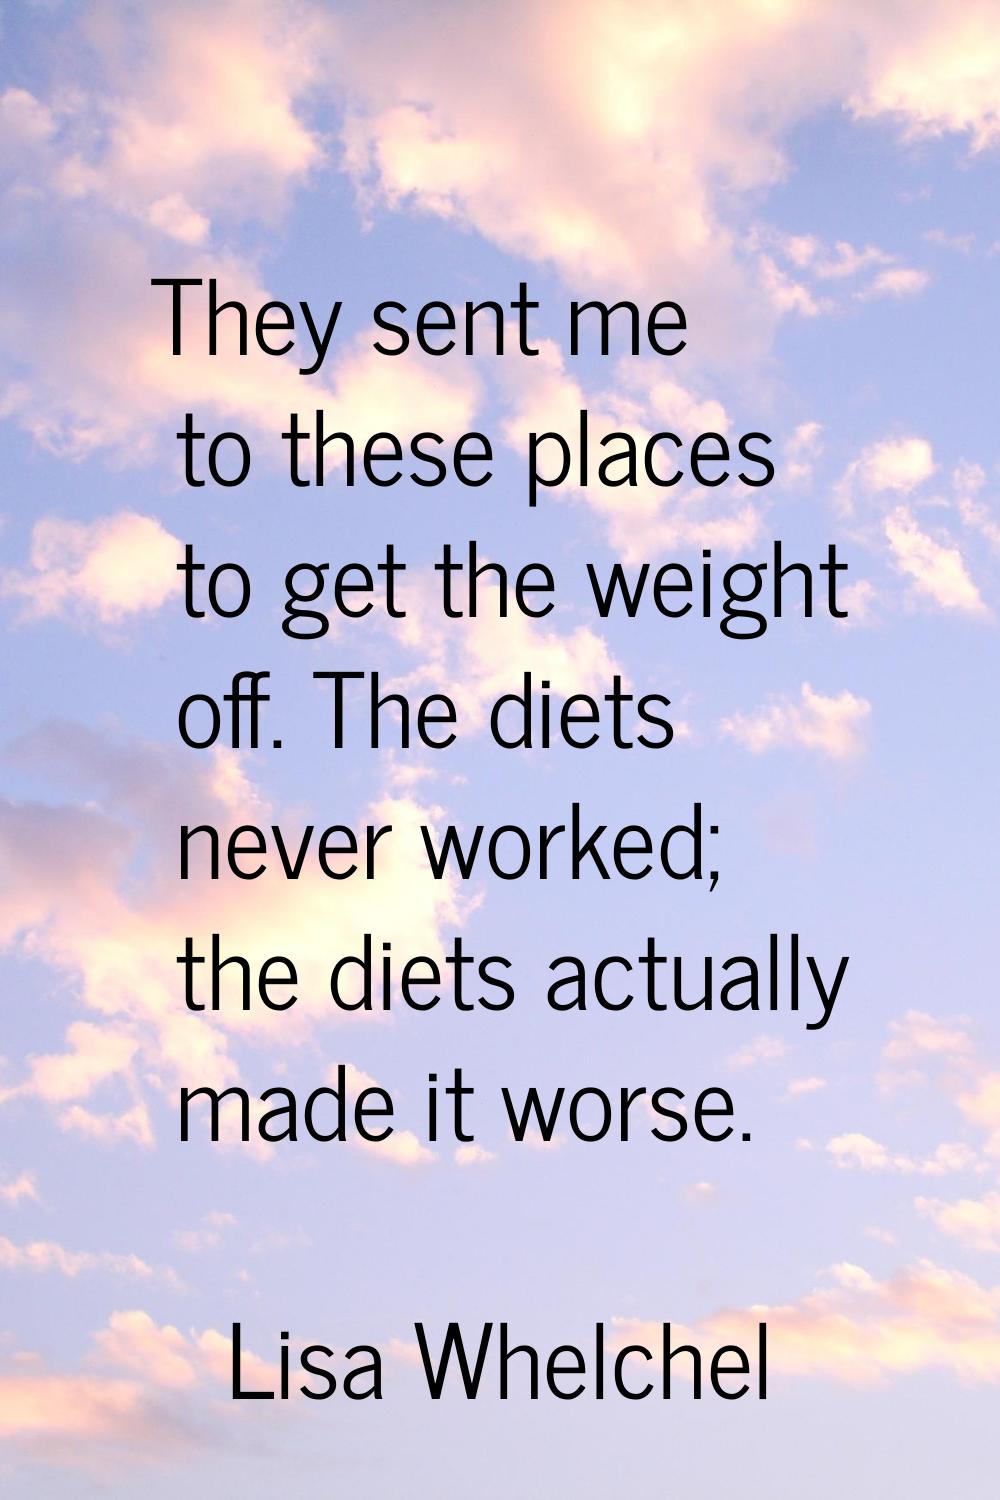 They sent me to these places to get the weight off. The diets never worked; the diets actually made